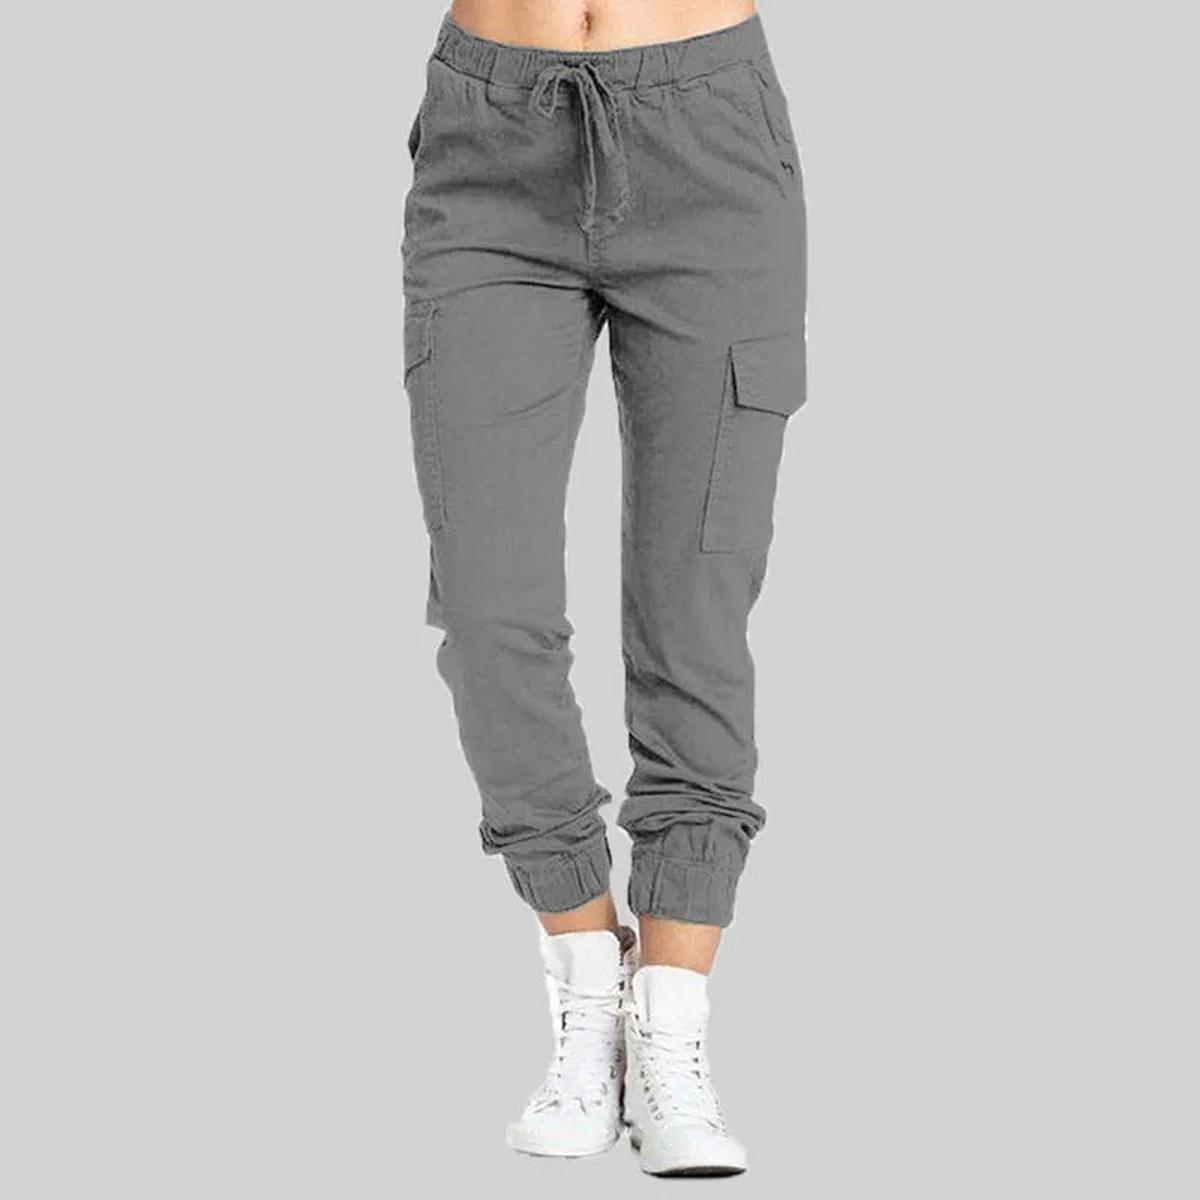 6 Pocket Cargo Trouser for Women and Girls Soft Cotton Slim Fit